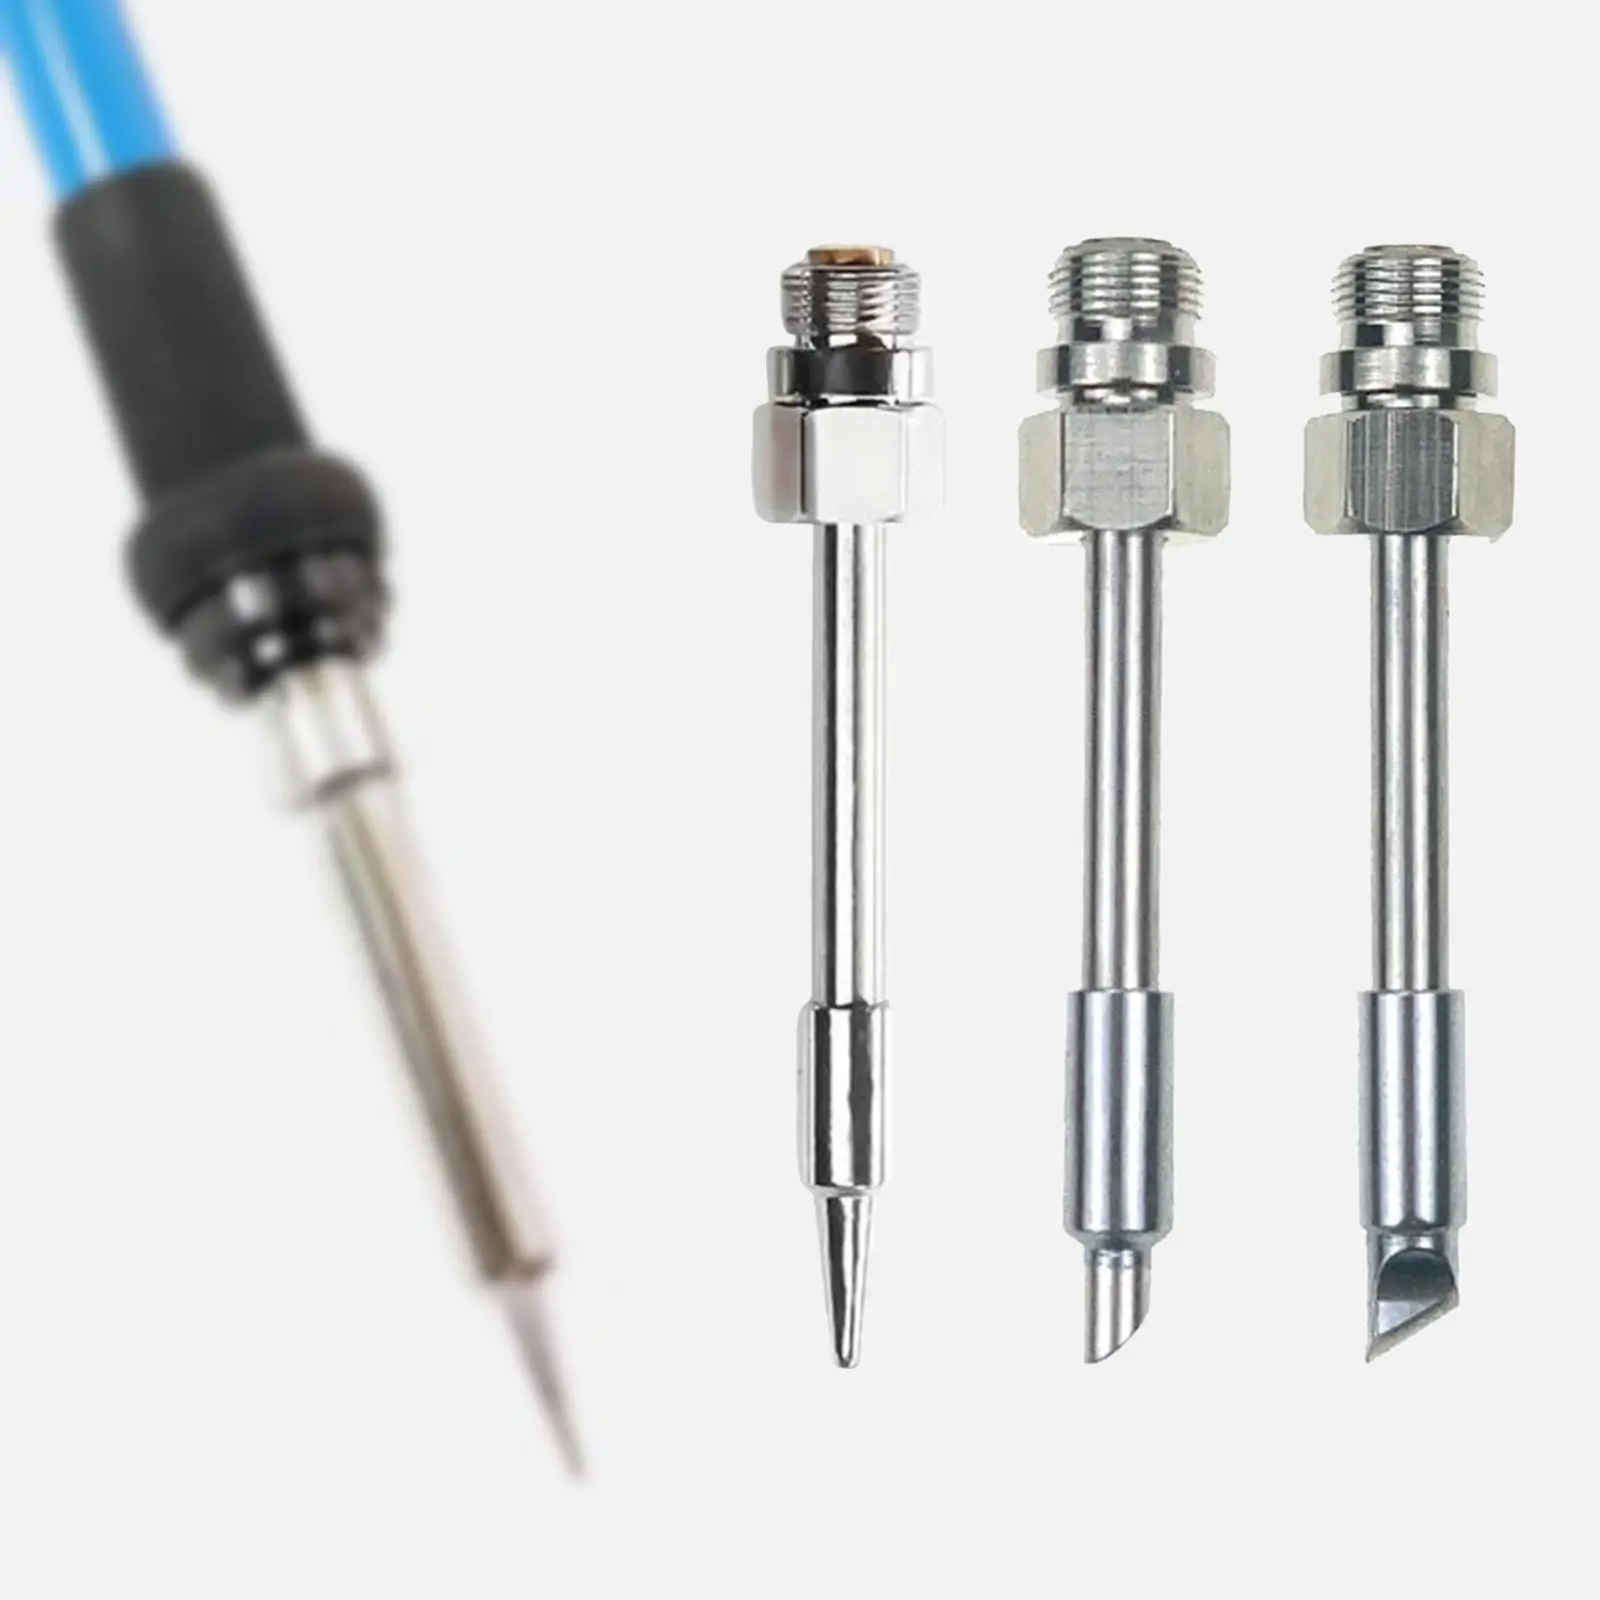 USB Soldering Iron Tips Threaded Soldering Tips Portable Tip Replace Interface Soldering Tips Welding Tool for Soldering Station